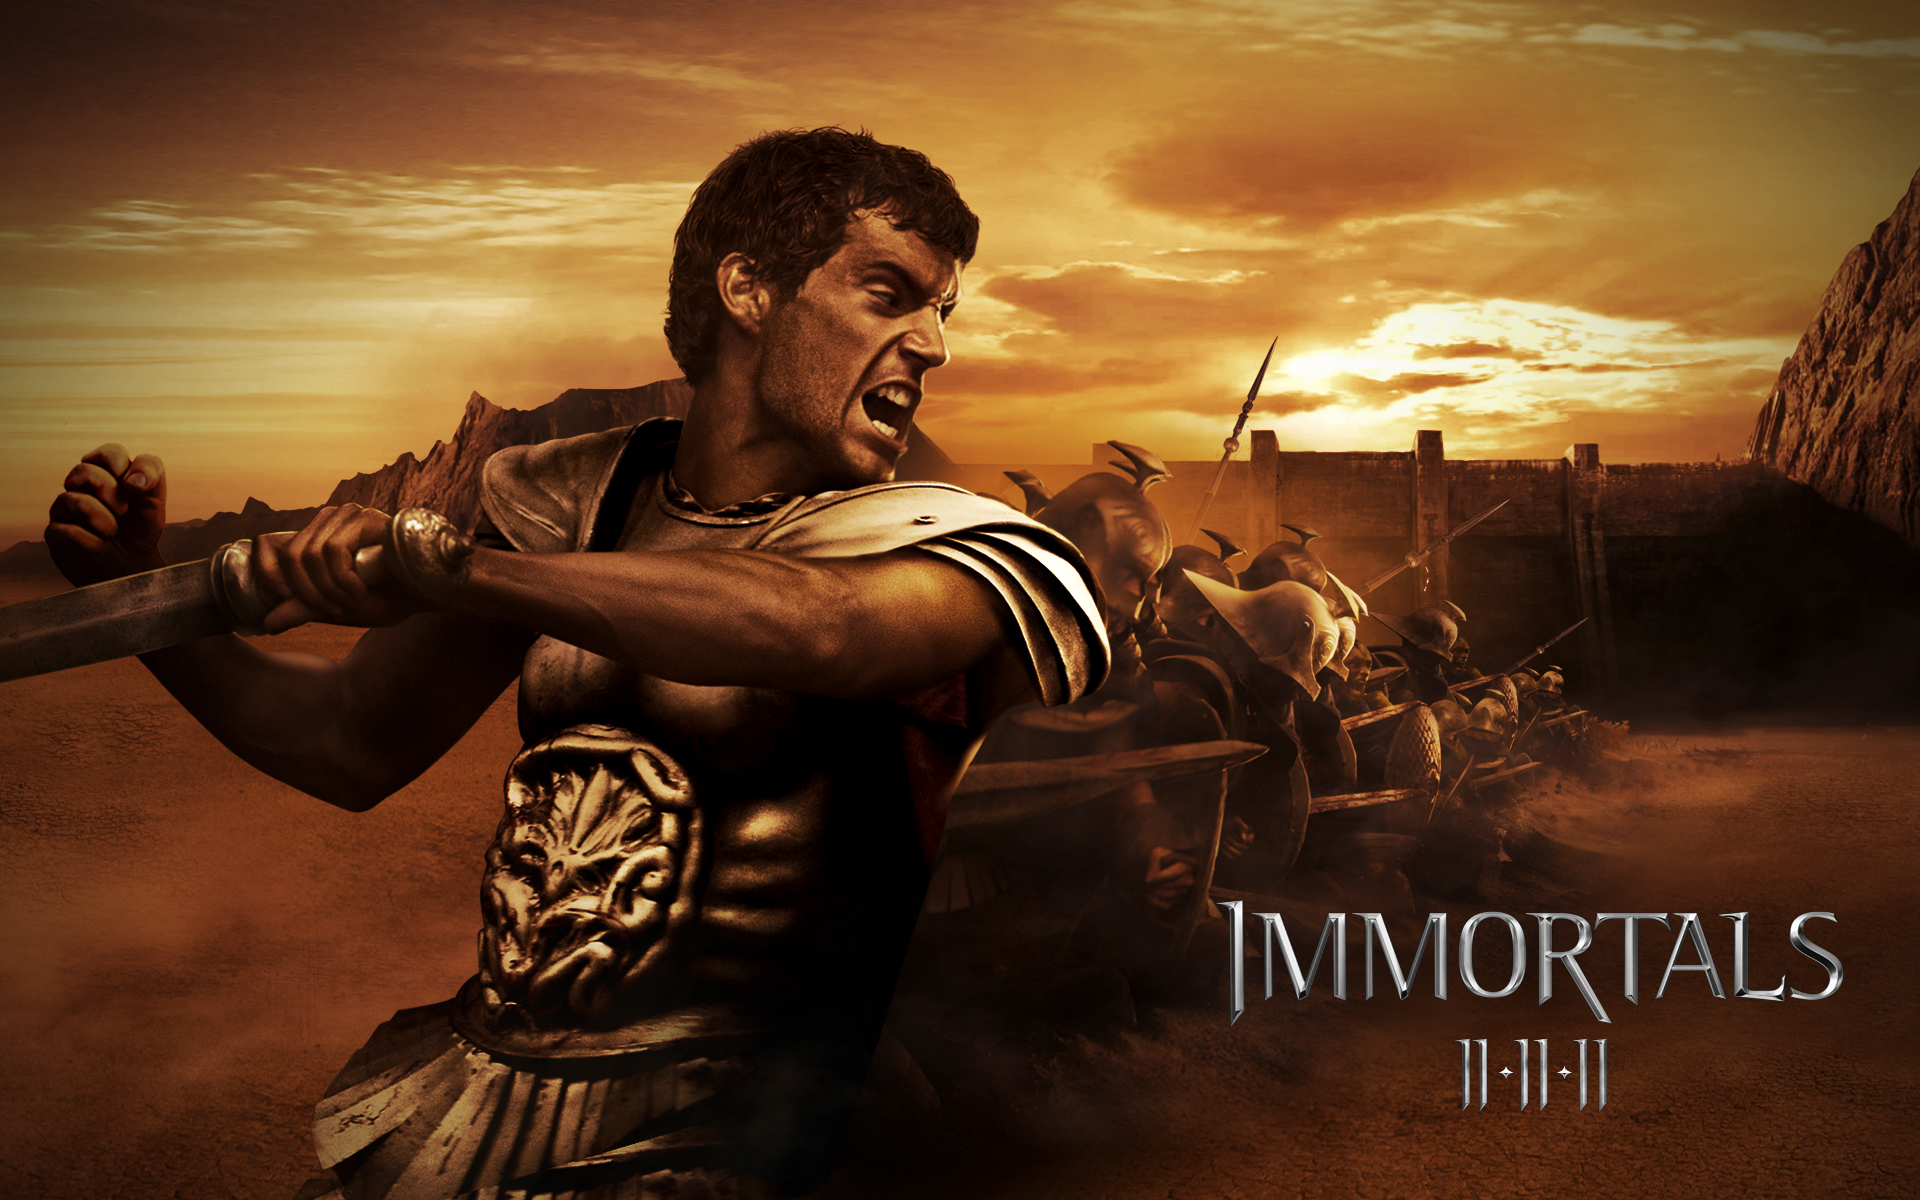 immortals the movie online free